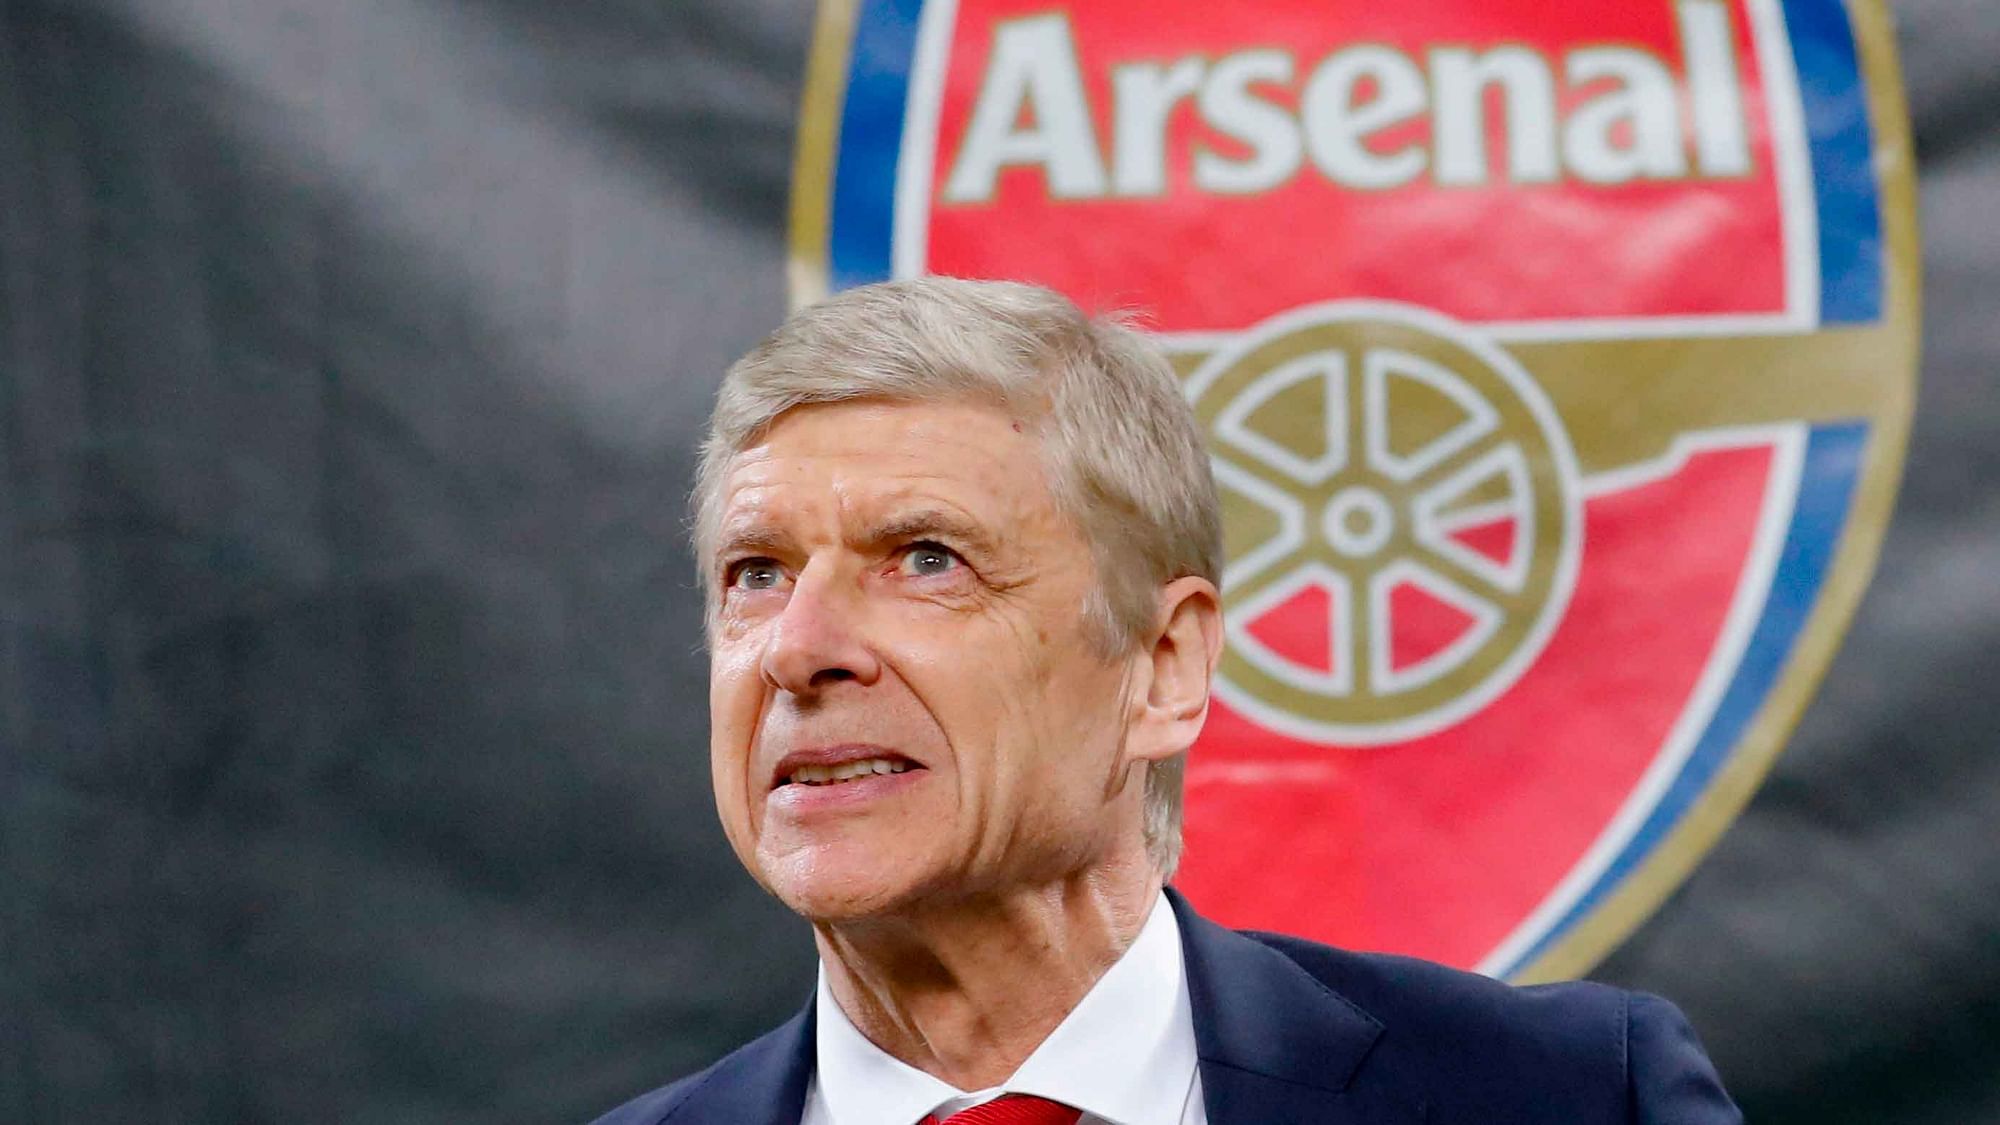 Arsenal manager Arsene Wenger is set to leave the club at the end of season.